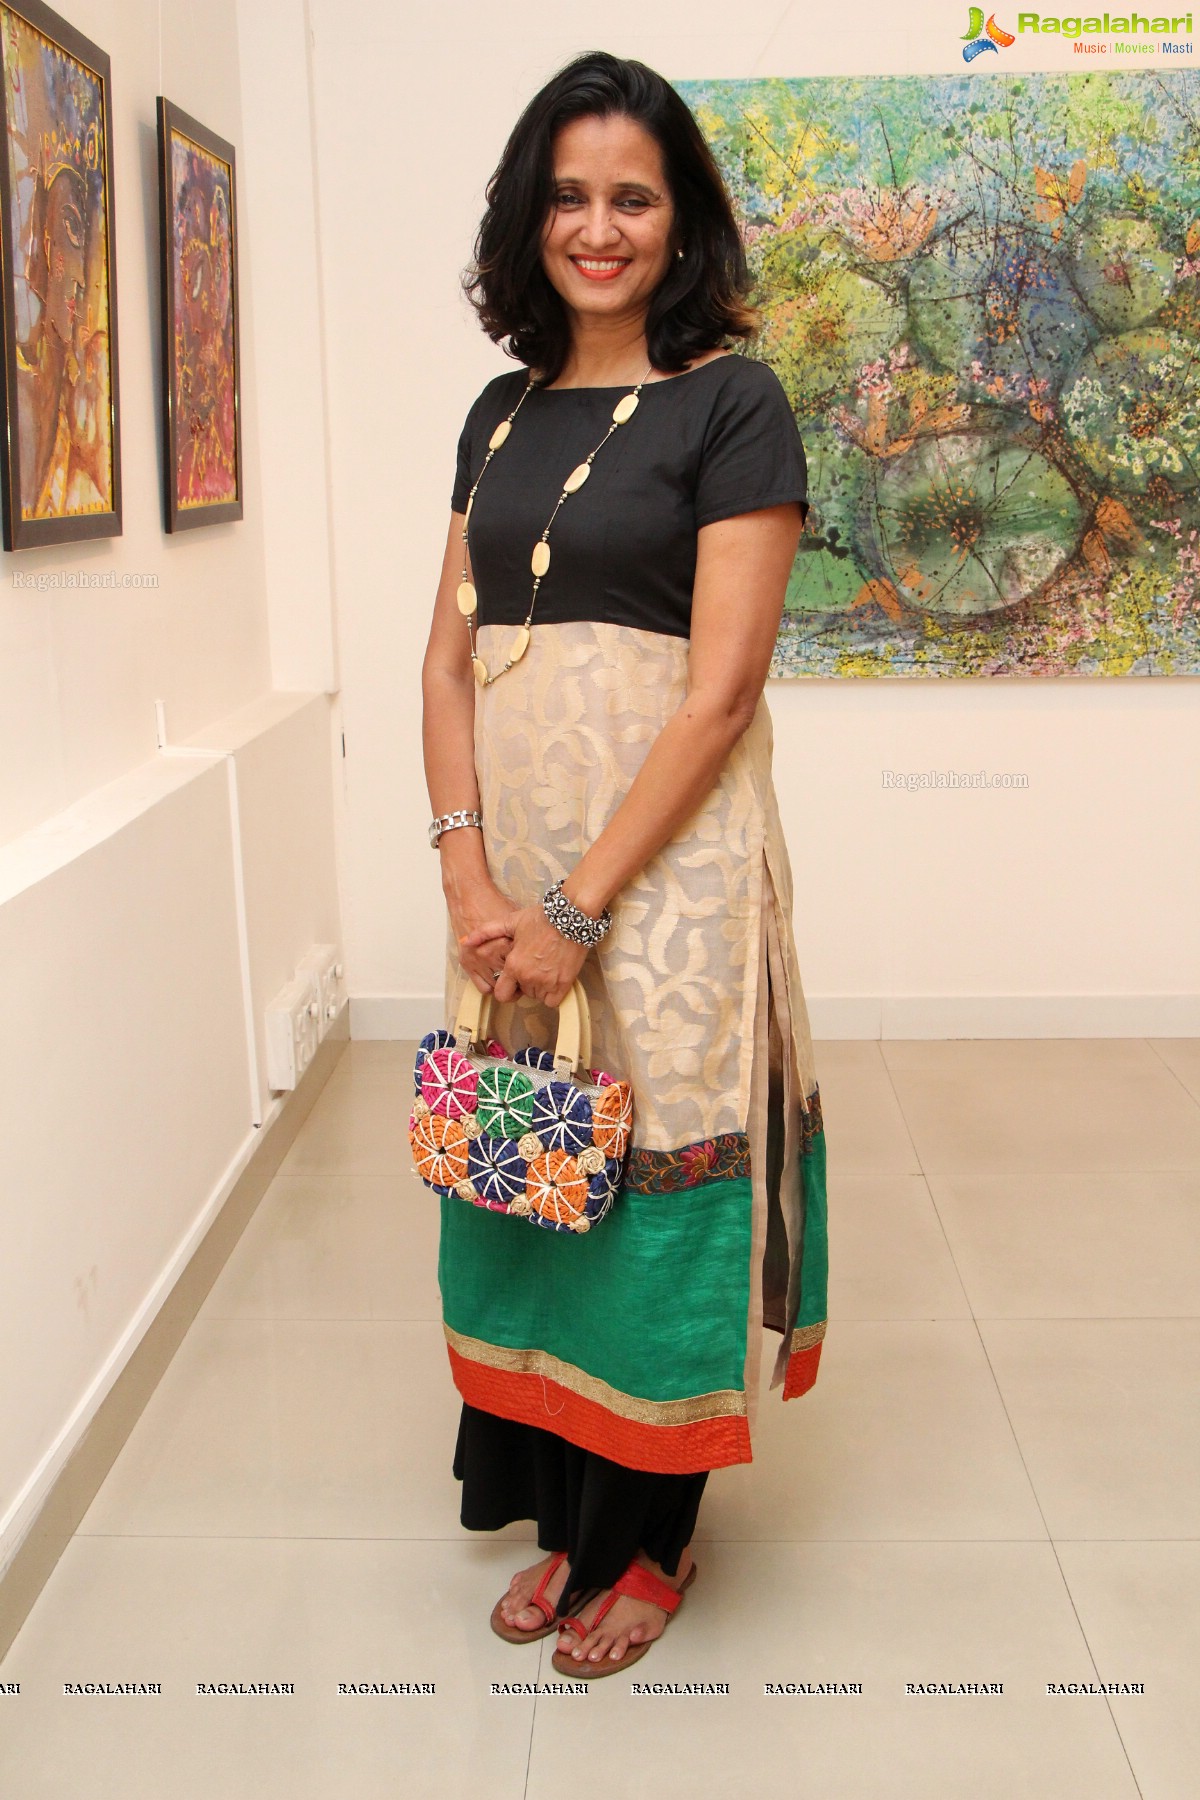 Chandana Khan Solo Art Exhibition at Gallery Space, Hyderabad